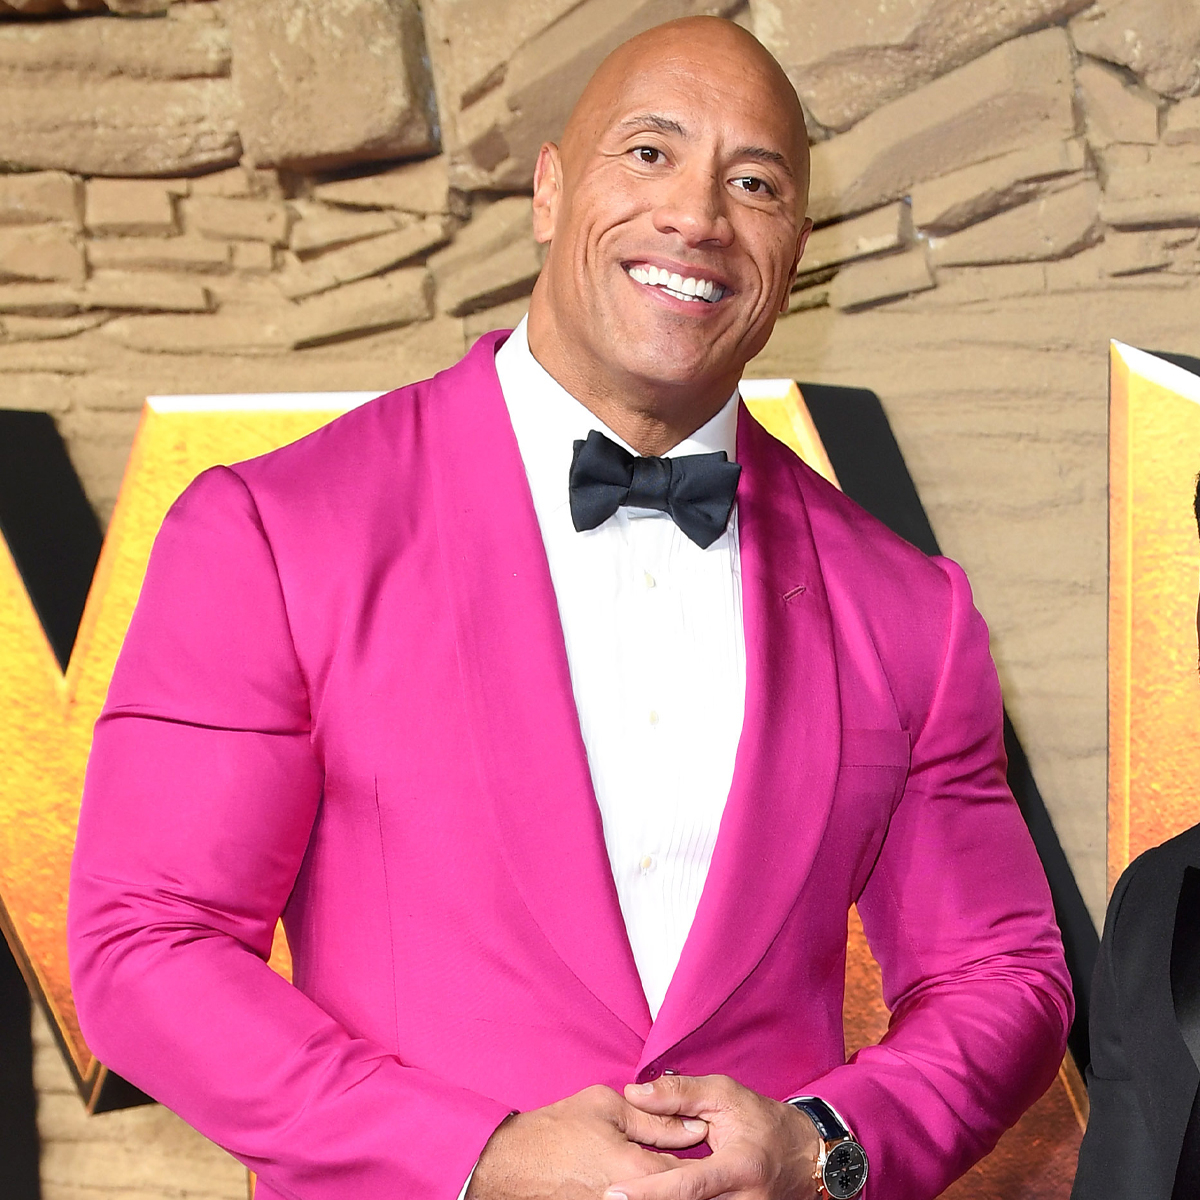 Dwayne Johnson’s Daughters Give Him a Pink Makeover in Cute Video